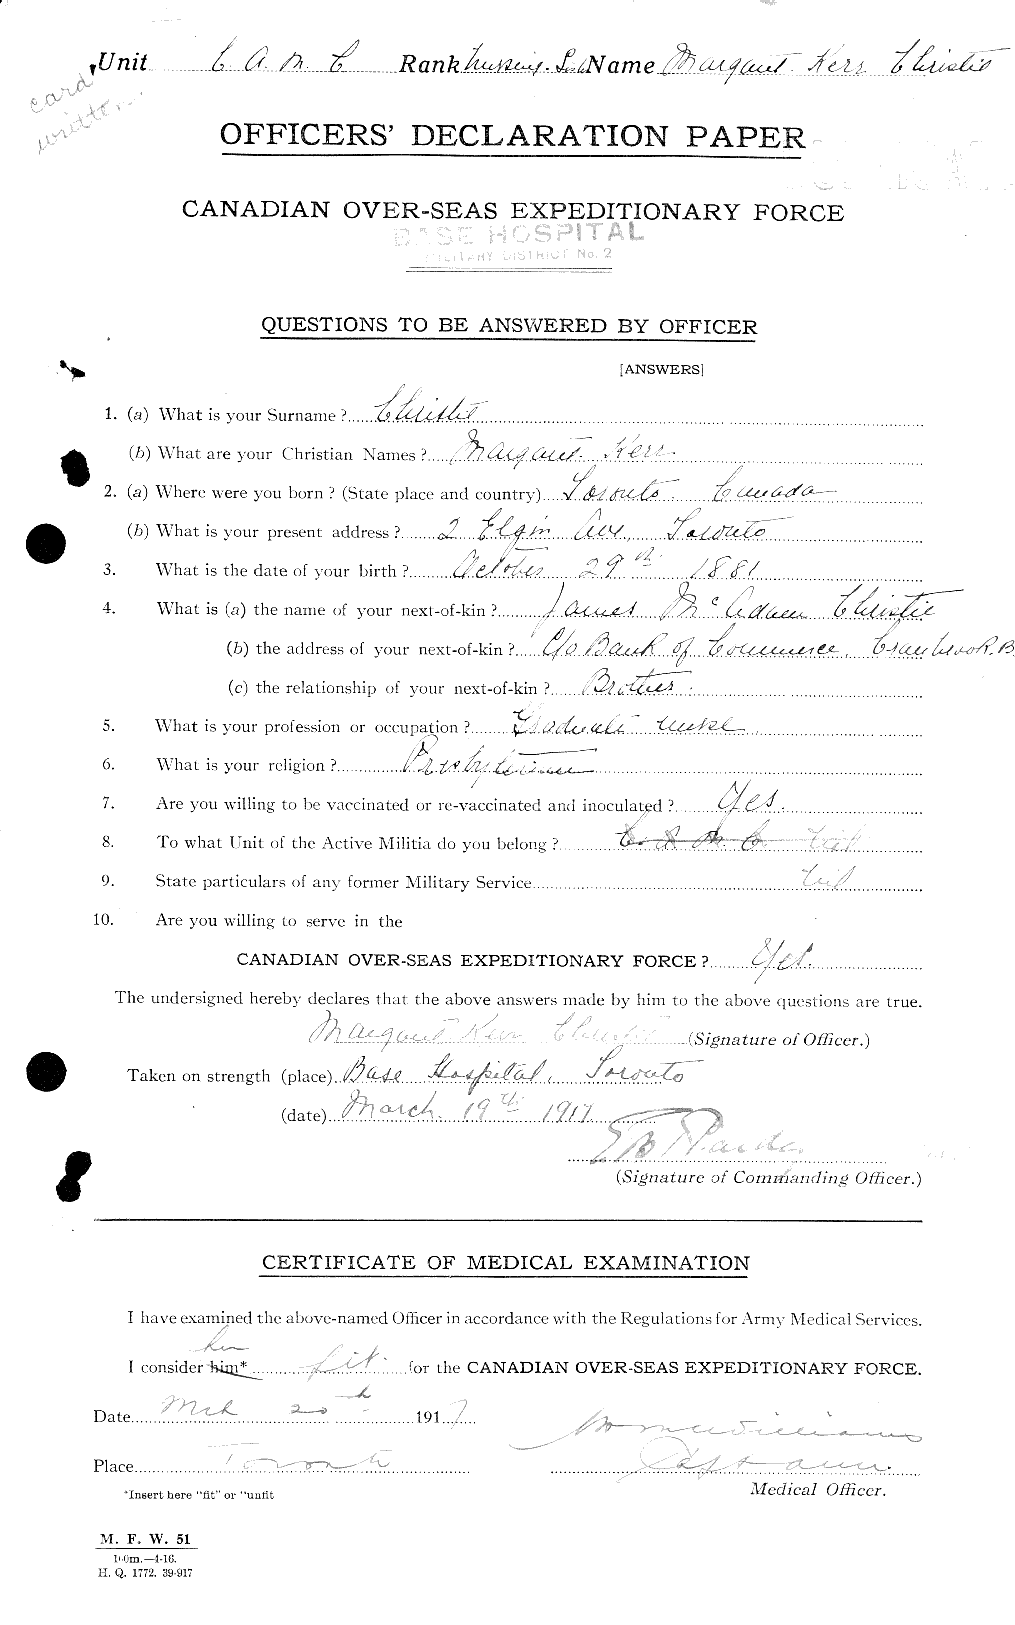 Personnel Records of the First World War - CEF 022030a